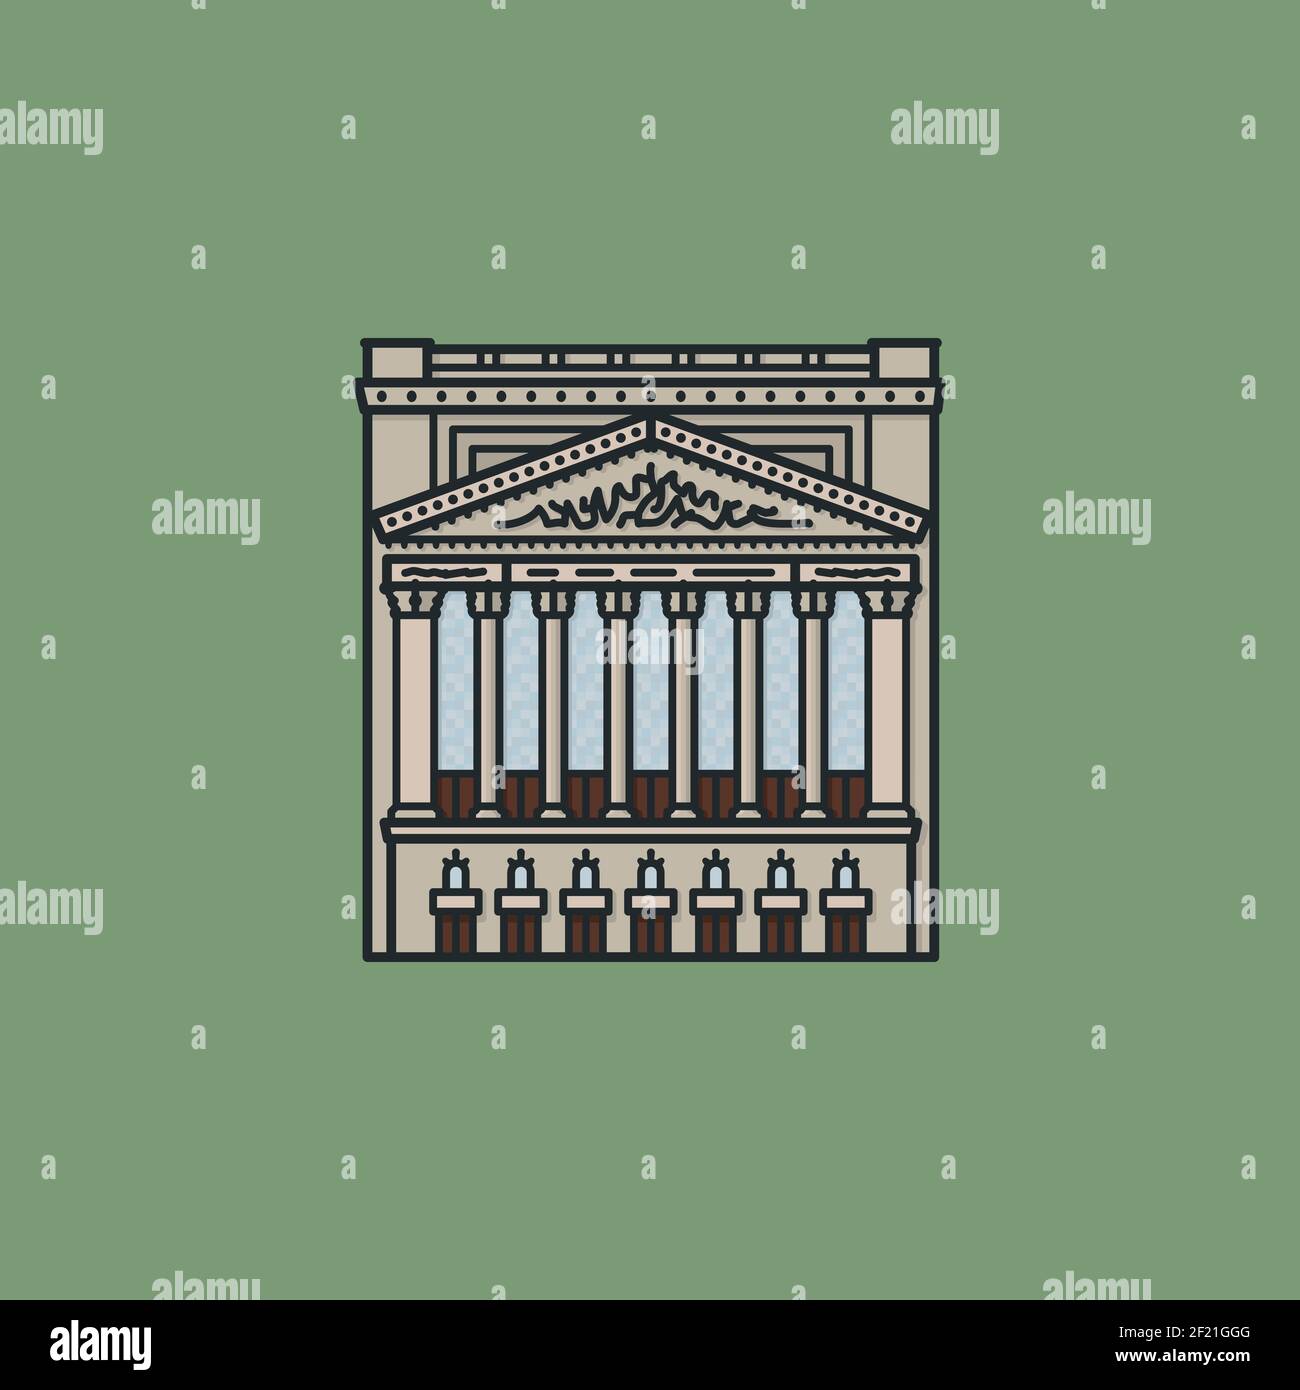 New York Stock Exchange building on Wall Street front view vector illustration for Black Thursday on October 24. Stock Vector